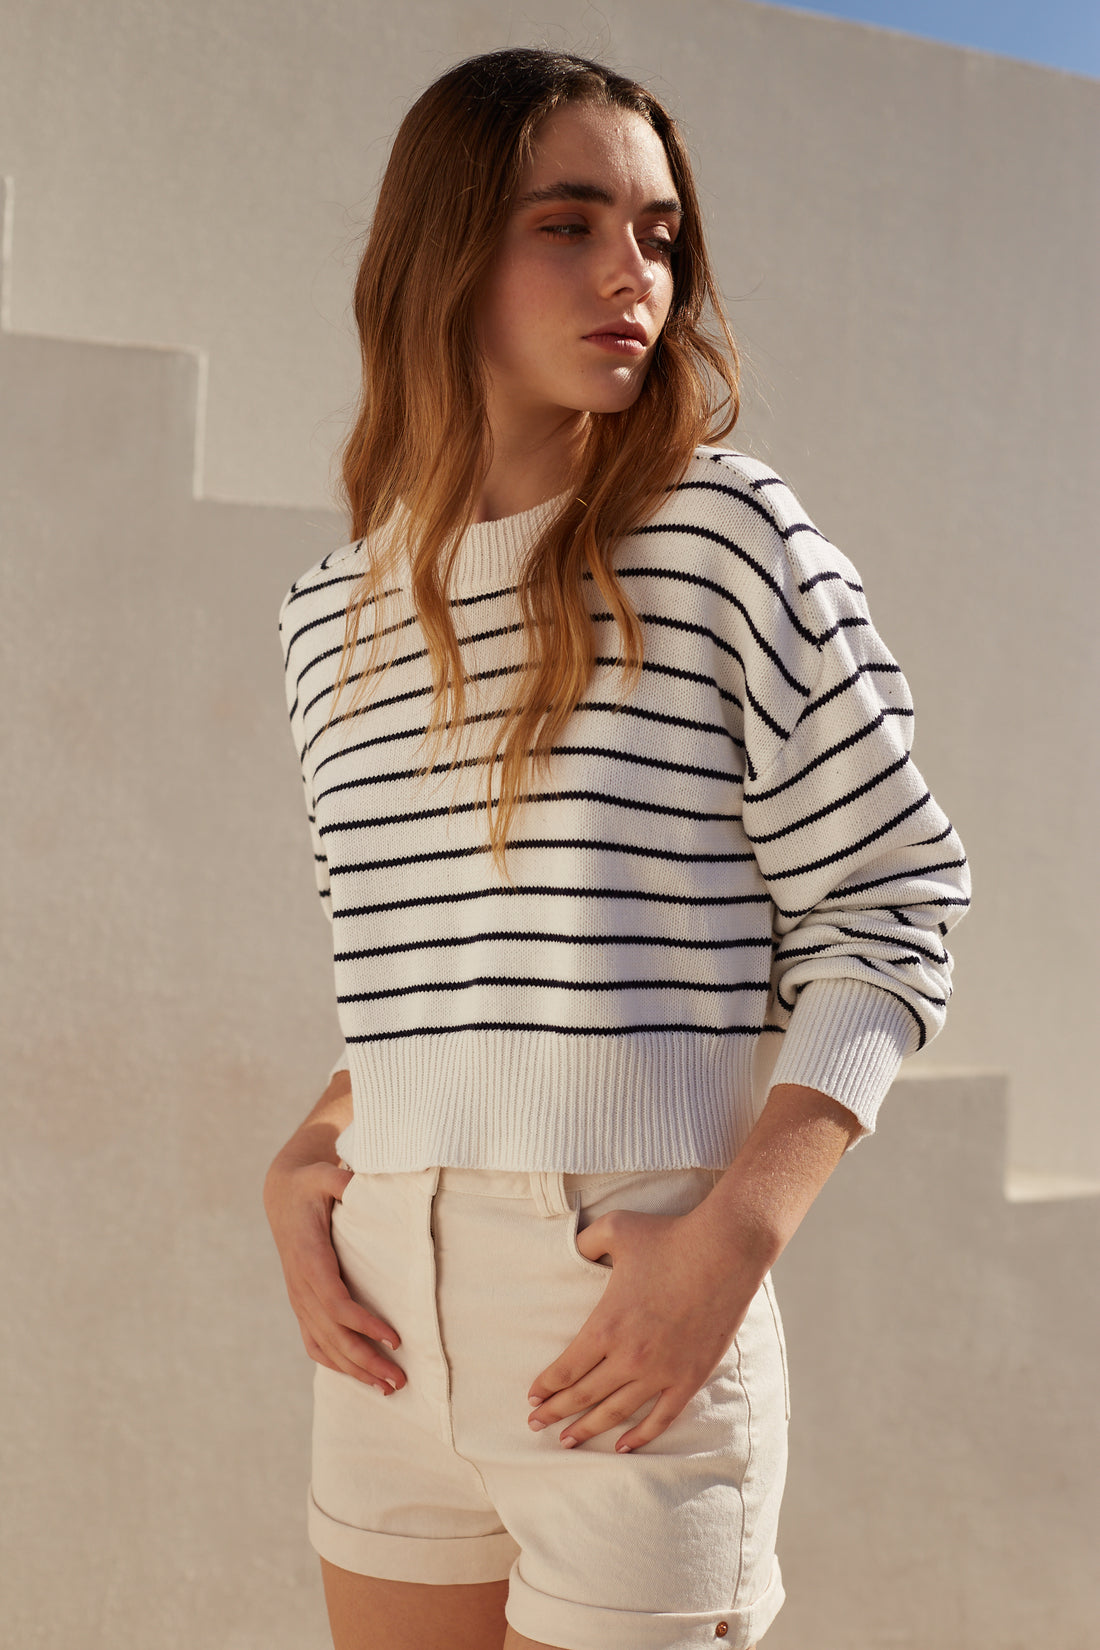 Deluc White Navy Blue Striped Cropped Sweater